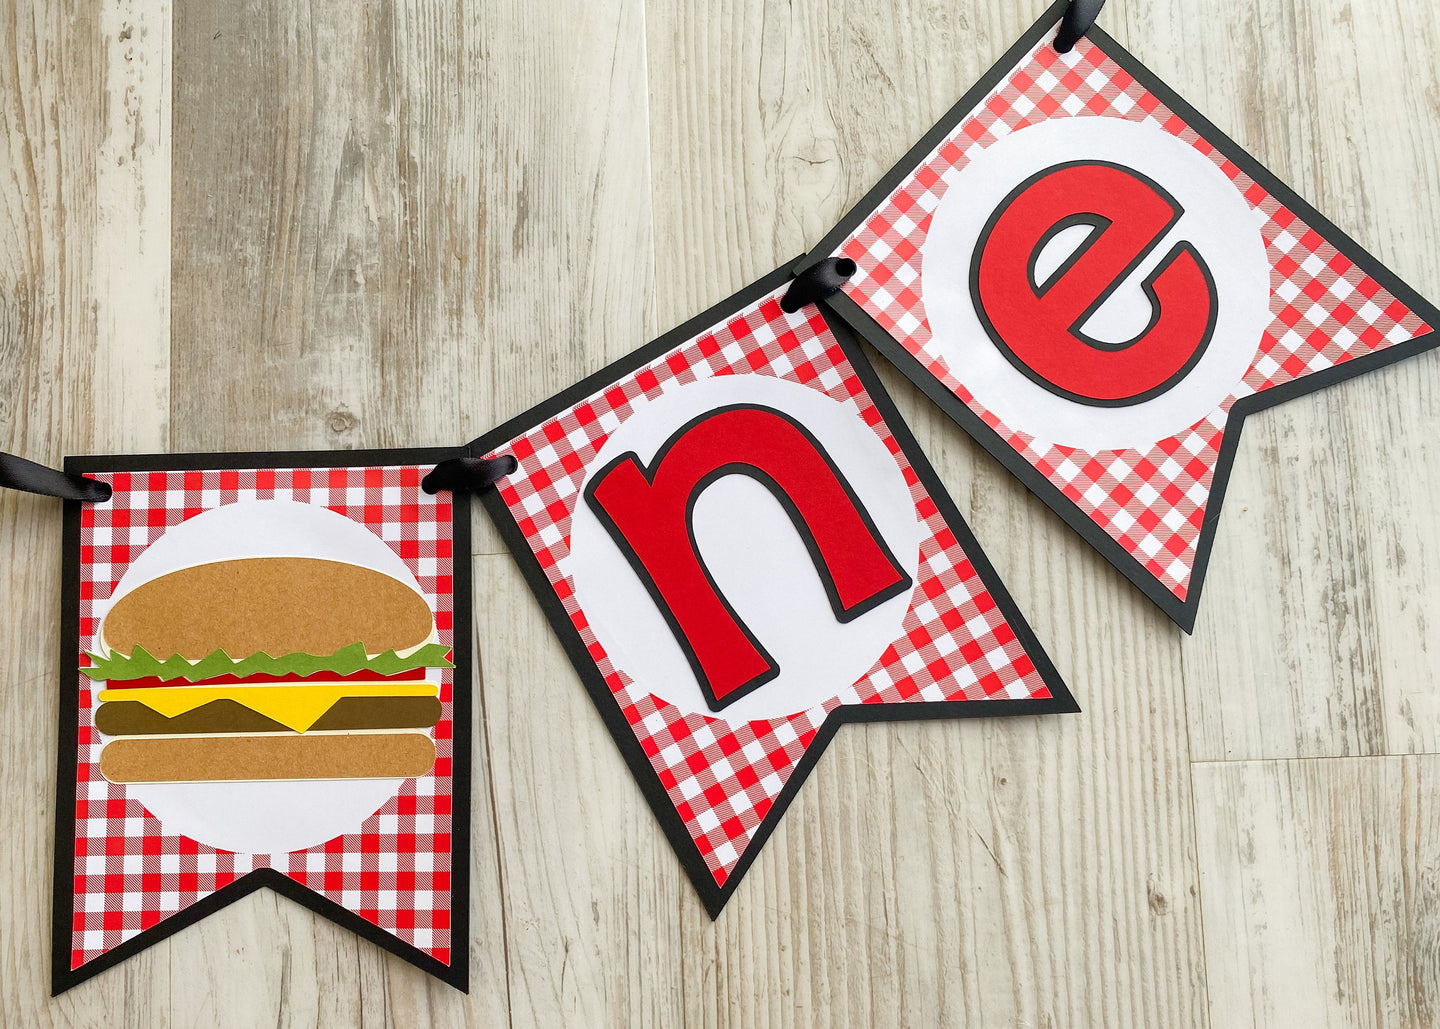 Hamburger ONE Banner, BBQ High Chair Banner, Cheeseburger First Birthday Party Decorations, Red Gingham Cook-out 1st Birthday Party Decor